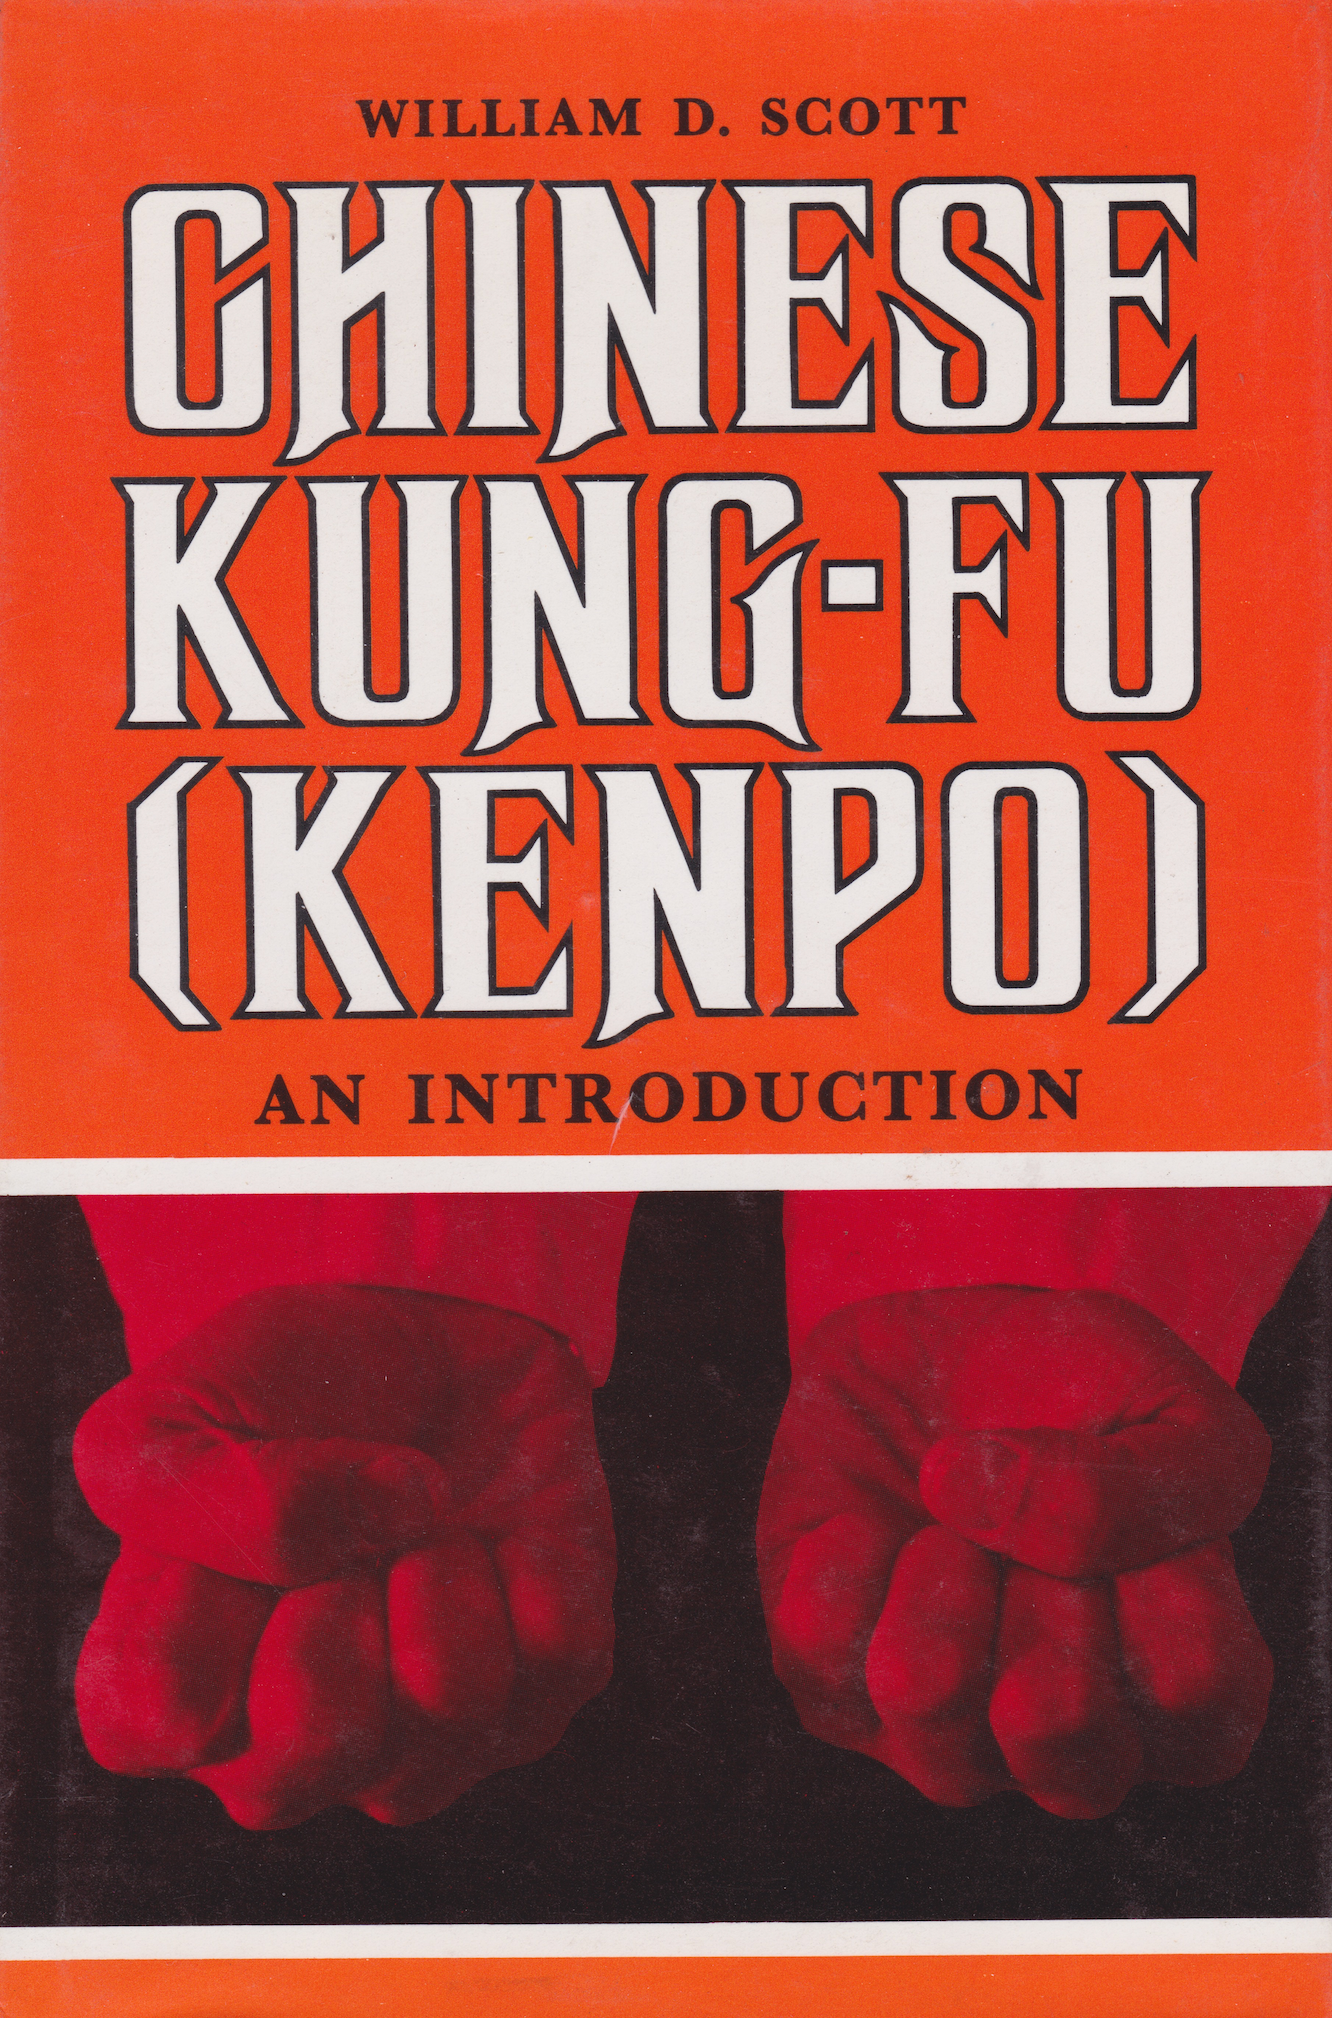 Chinese Kung Fu (Kenpo) Book by William D Scott (Hardcover)(Preowned)